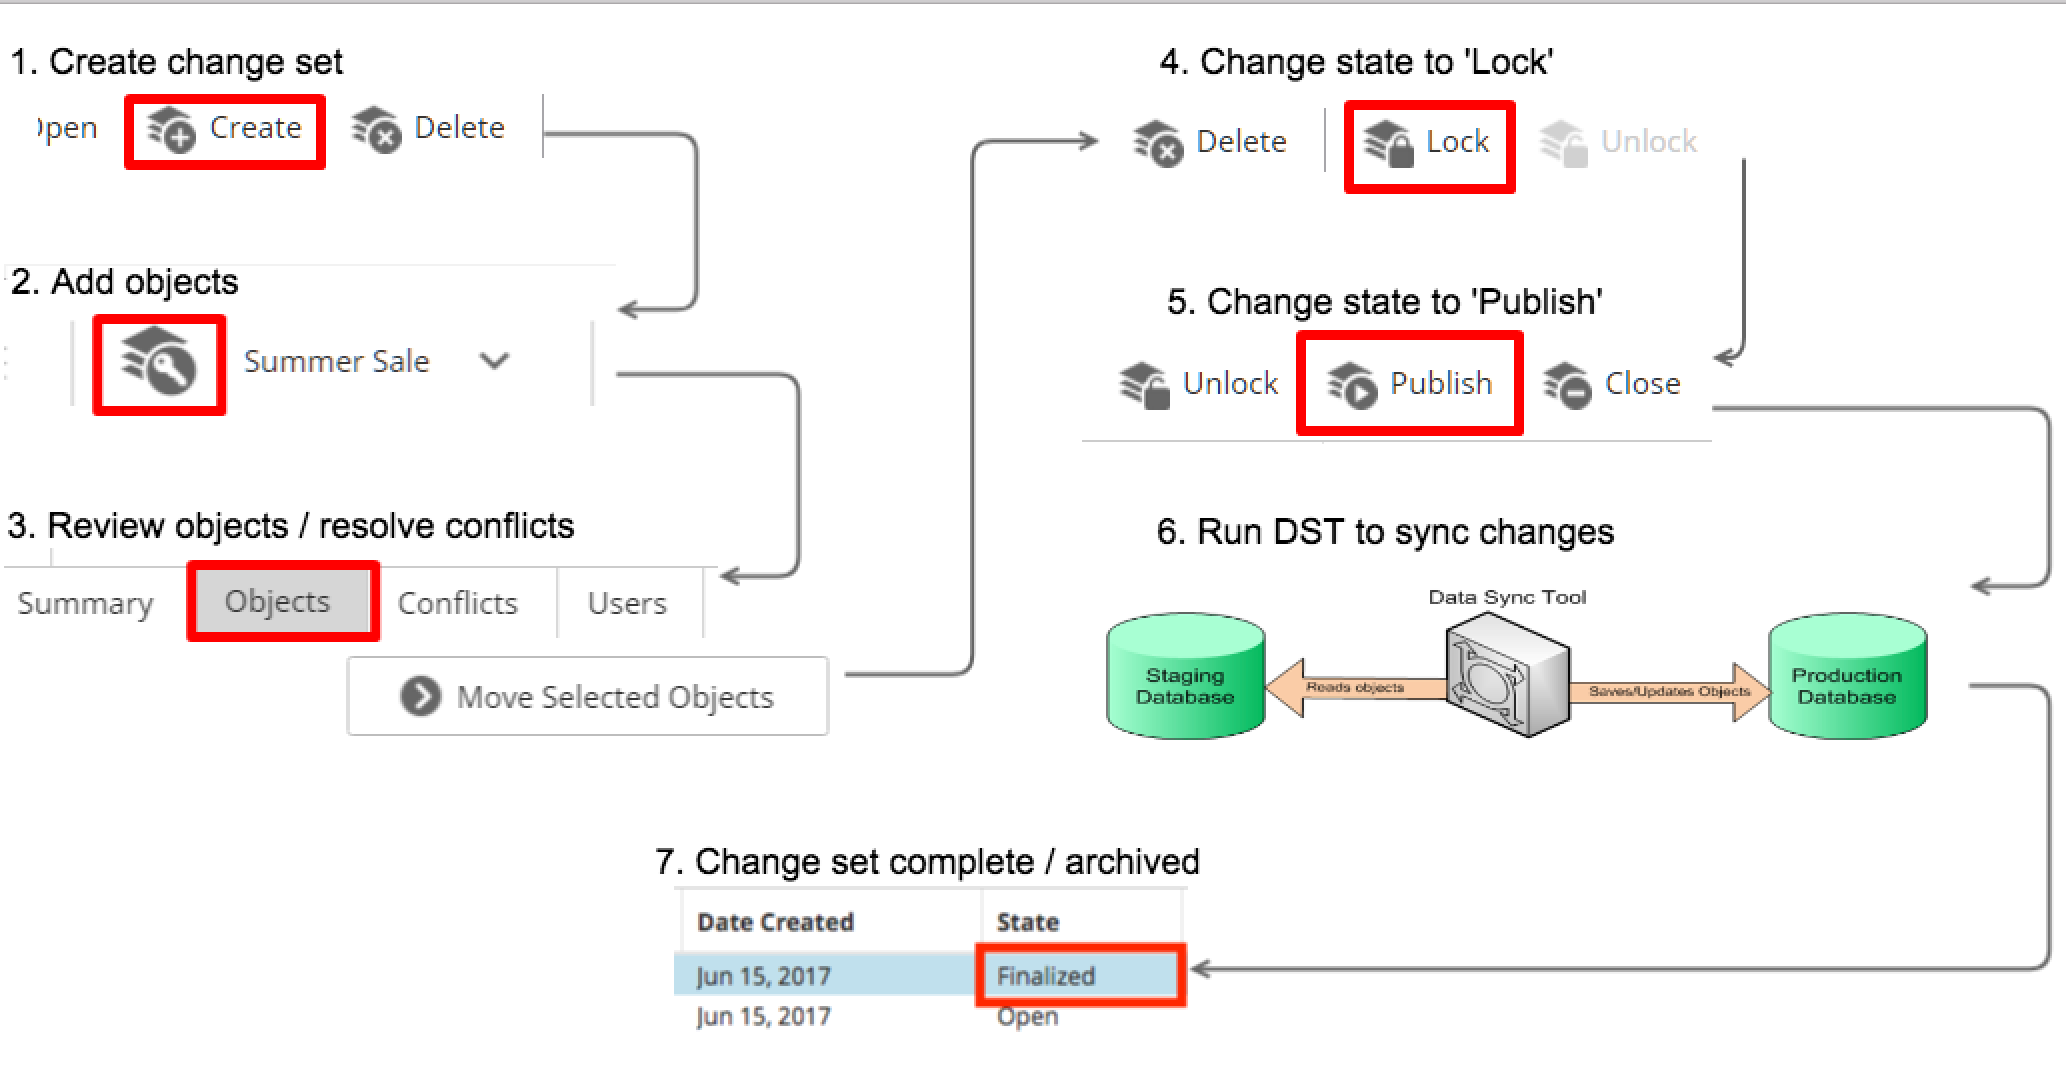 Overview of Data Sync Tool workflow